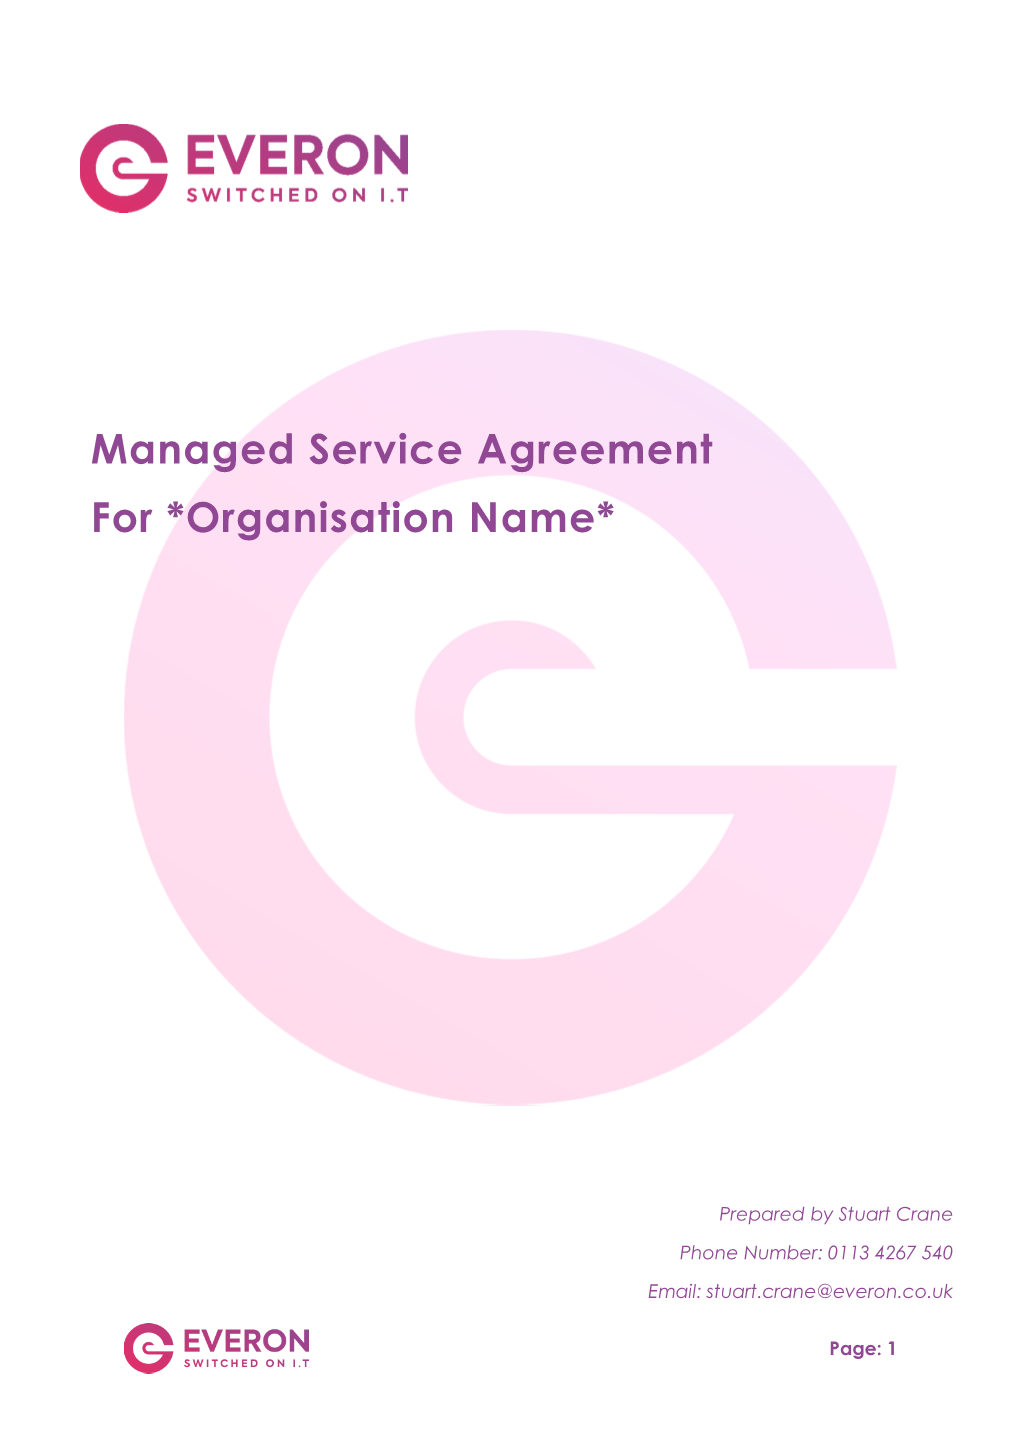 Managed Service Agreement for *Organisation Name*